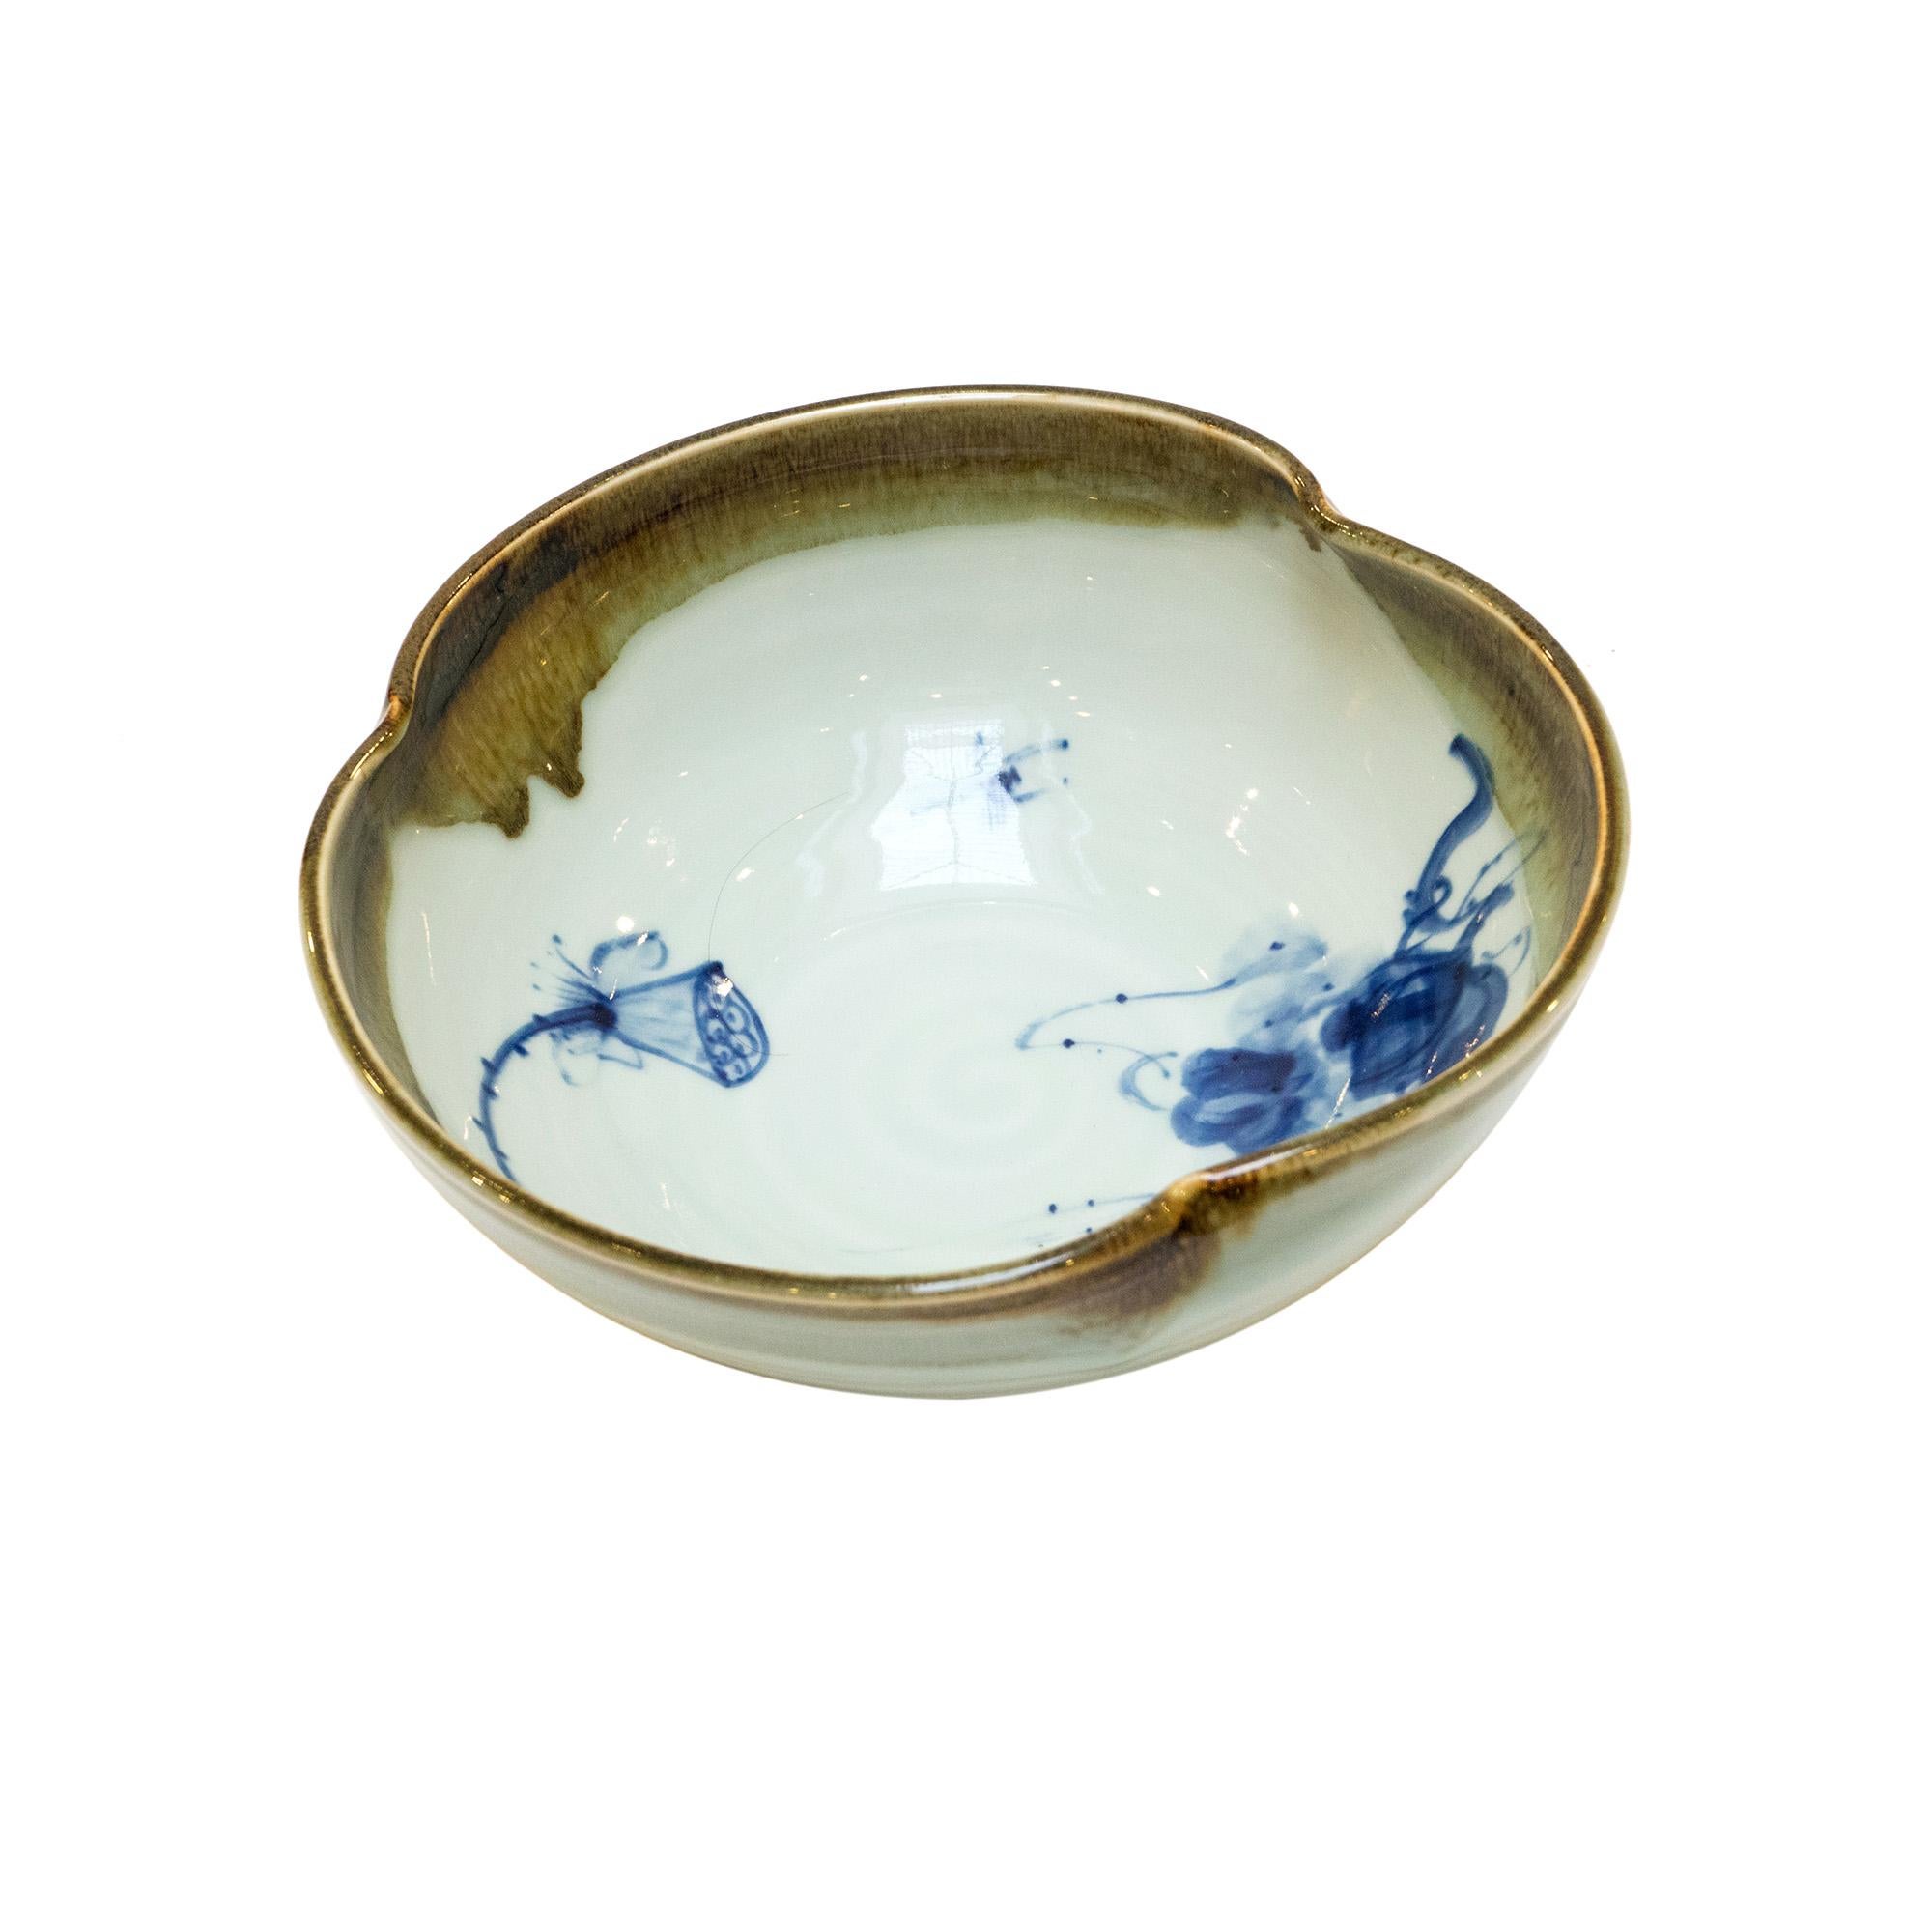 This handmade stoneware bowl features a decorative traditional calligraphy design in blue and white. Due to the handmade nature of this product, slight variation in color, pattern, shape and/or size is to be expected.
 